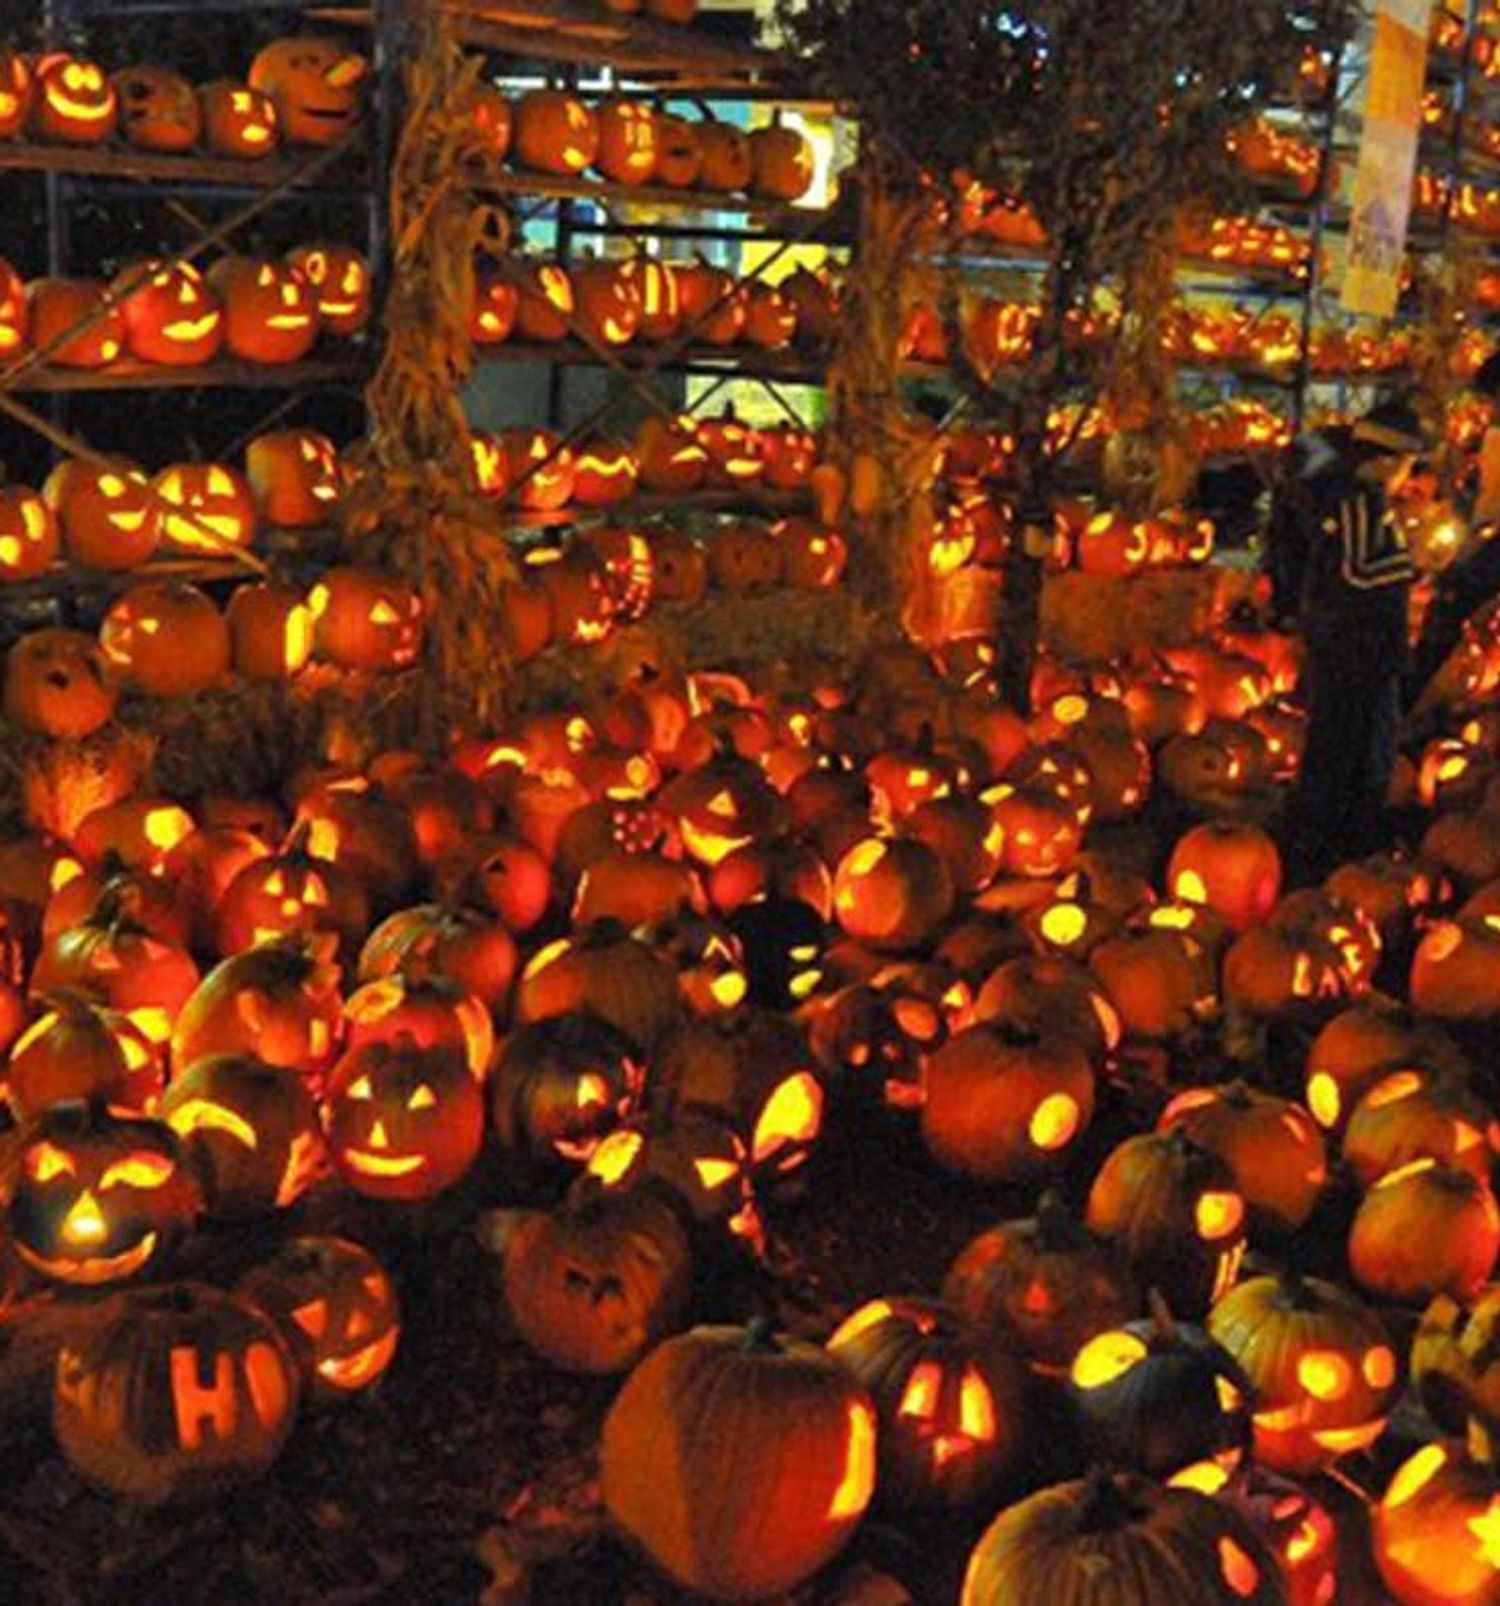 10 Jack-o’-Lantern Festivals You Have to See to Believe